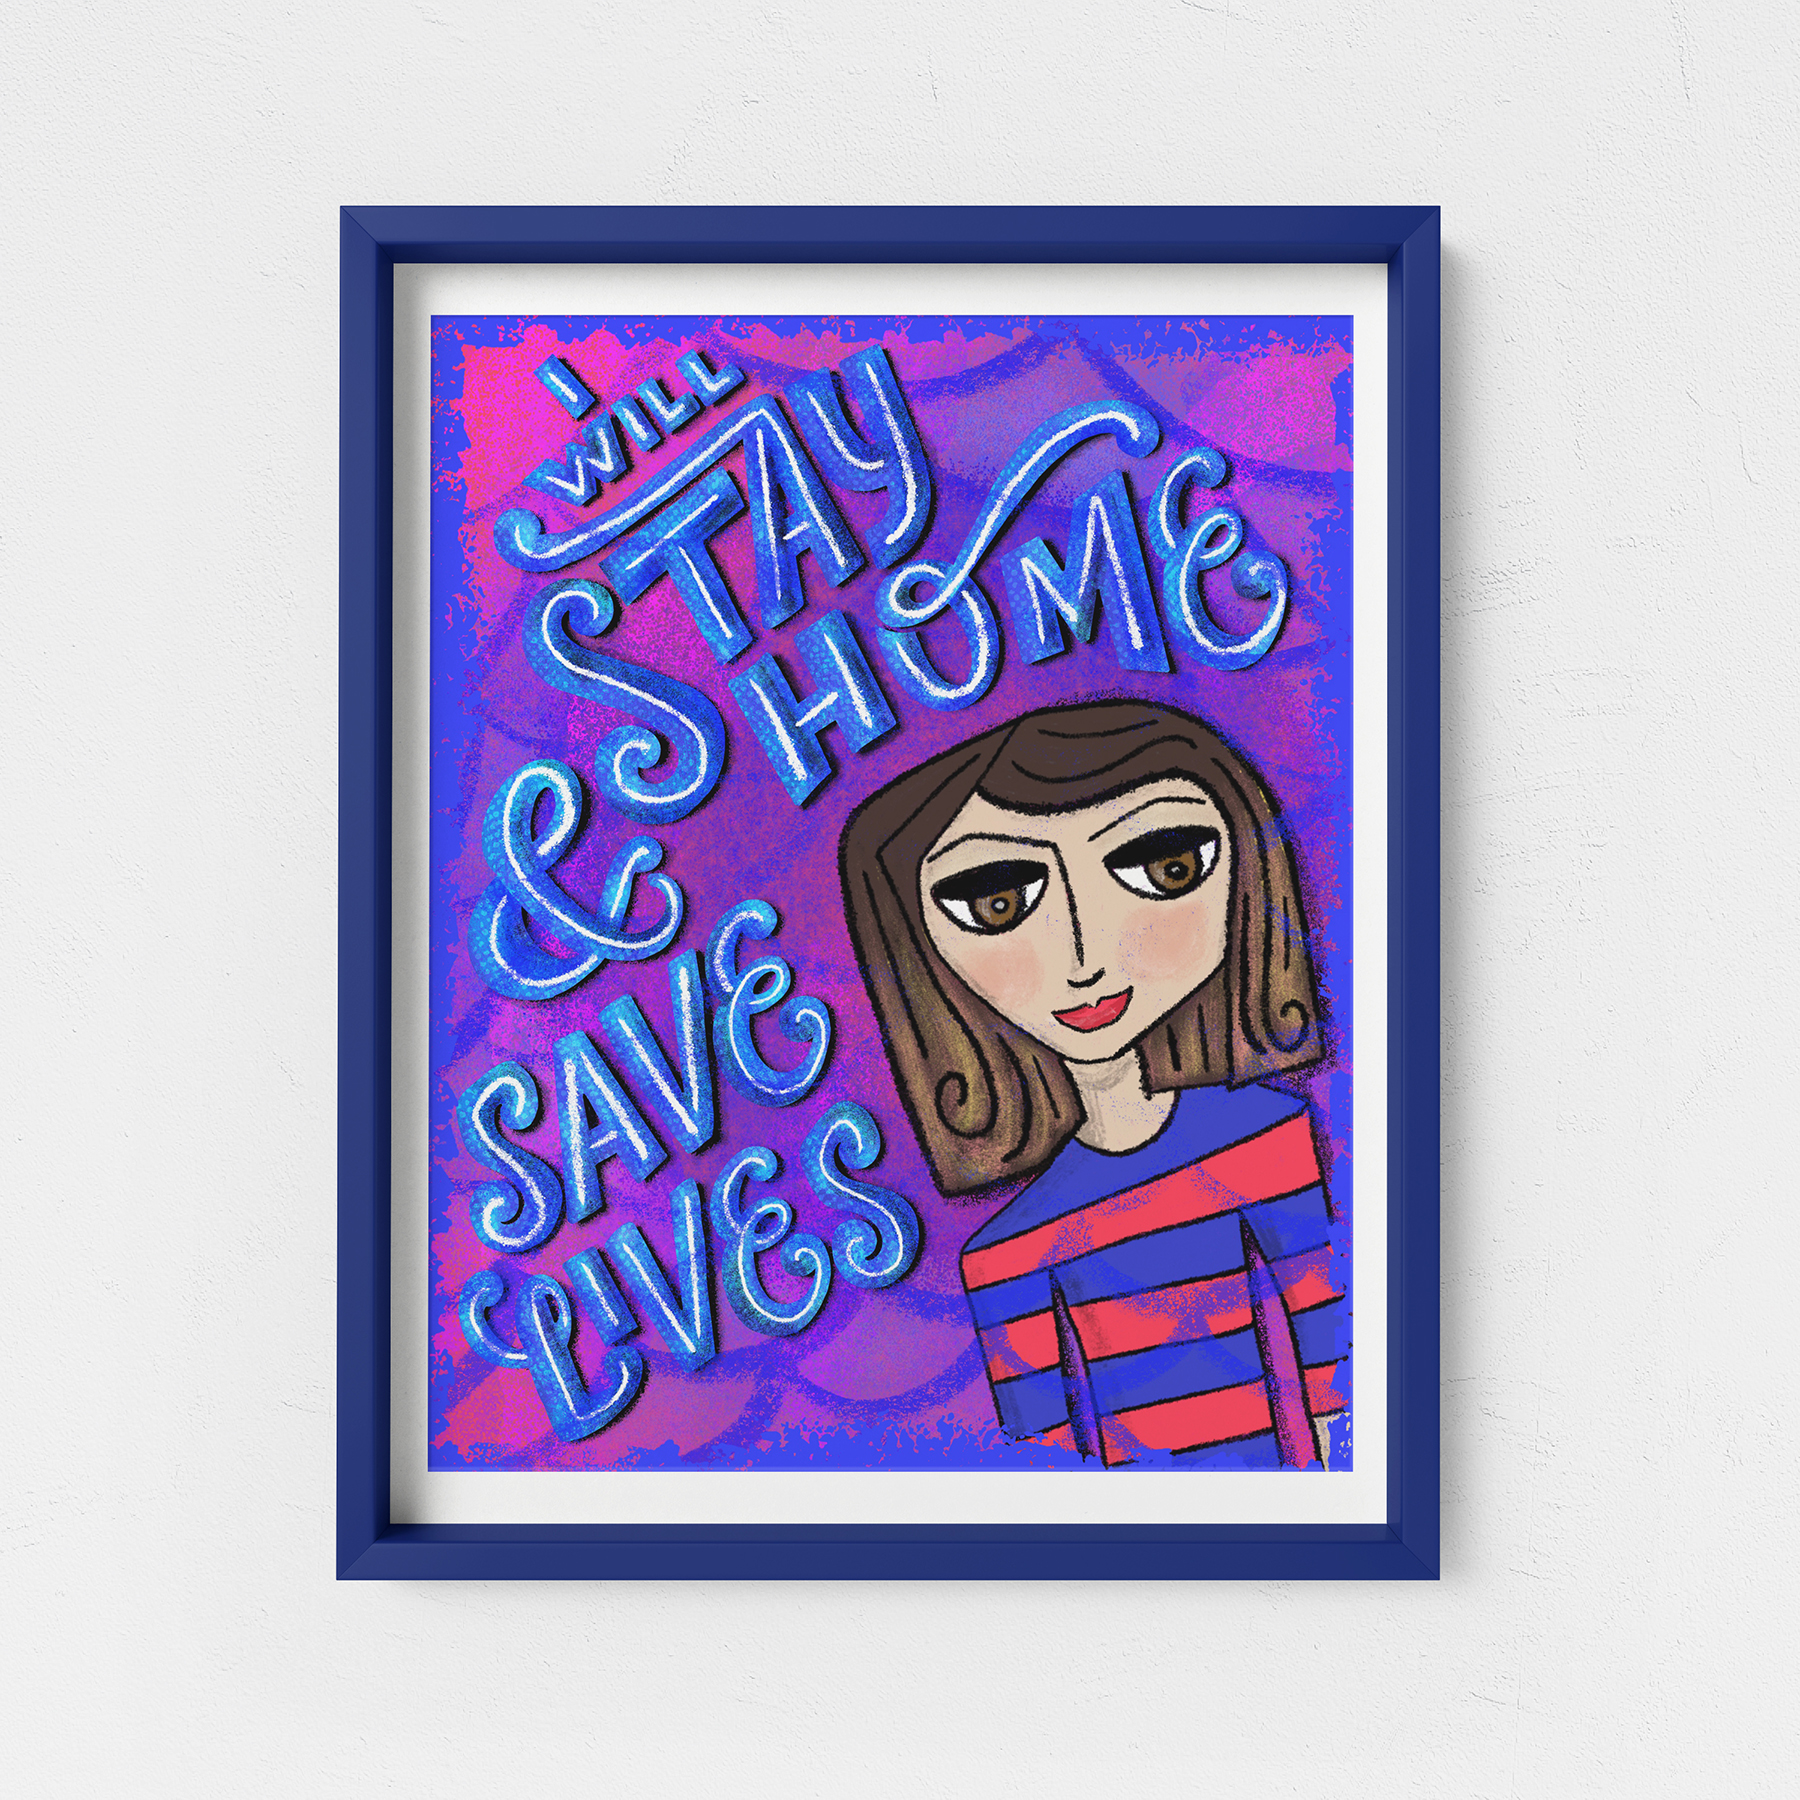 I Will Stay Home And Save Lives - Hand lettering illustration, vibrant, colorful, hand-drawn letters.